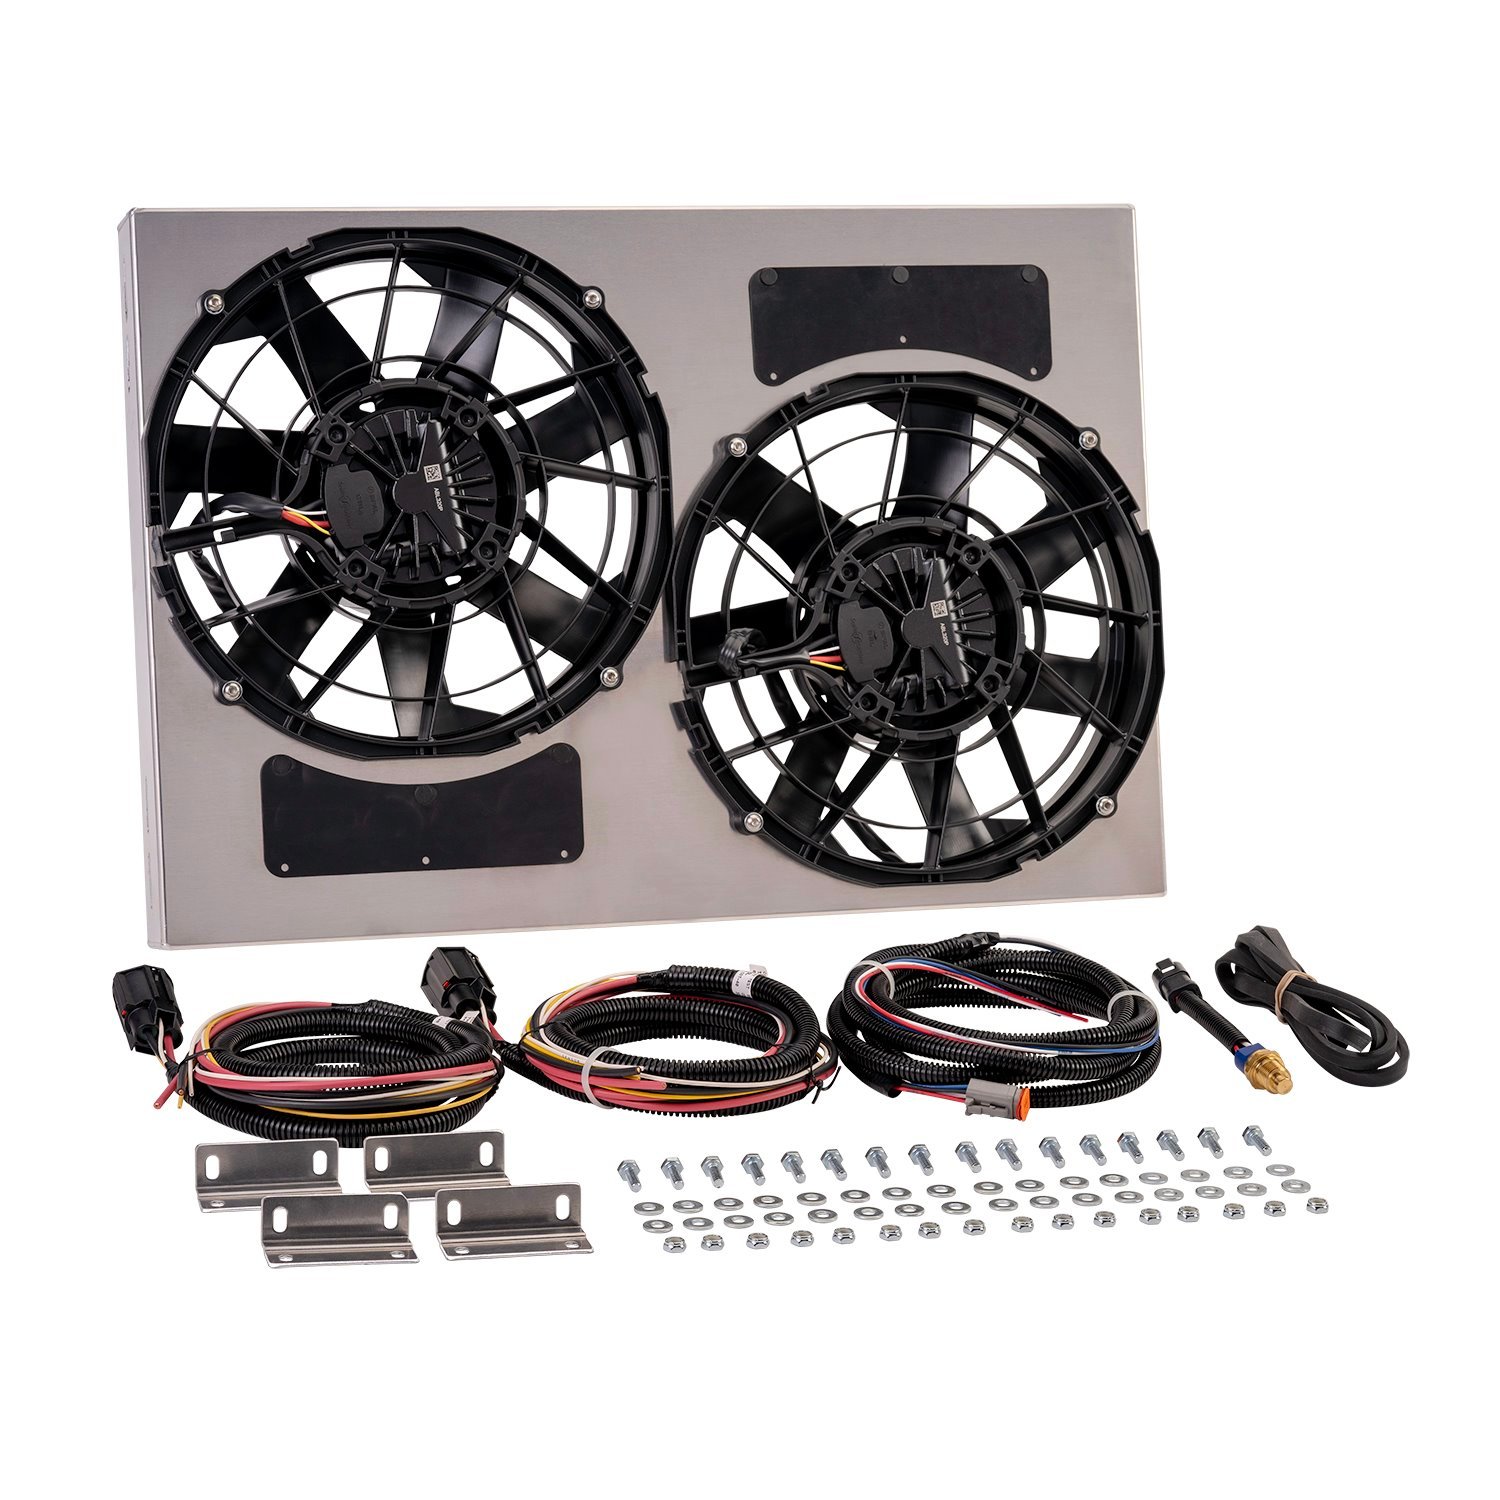 67926-195 Brushless Dual Powerpack 12 in. Radiator Fan Assembly with Integrated 195 Degree PWM Controller